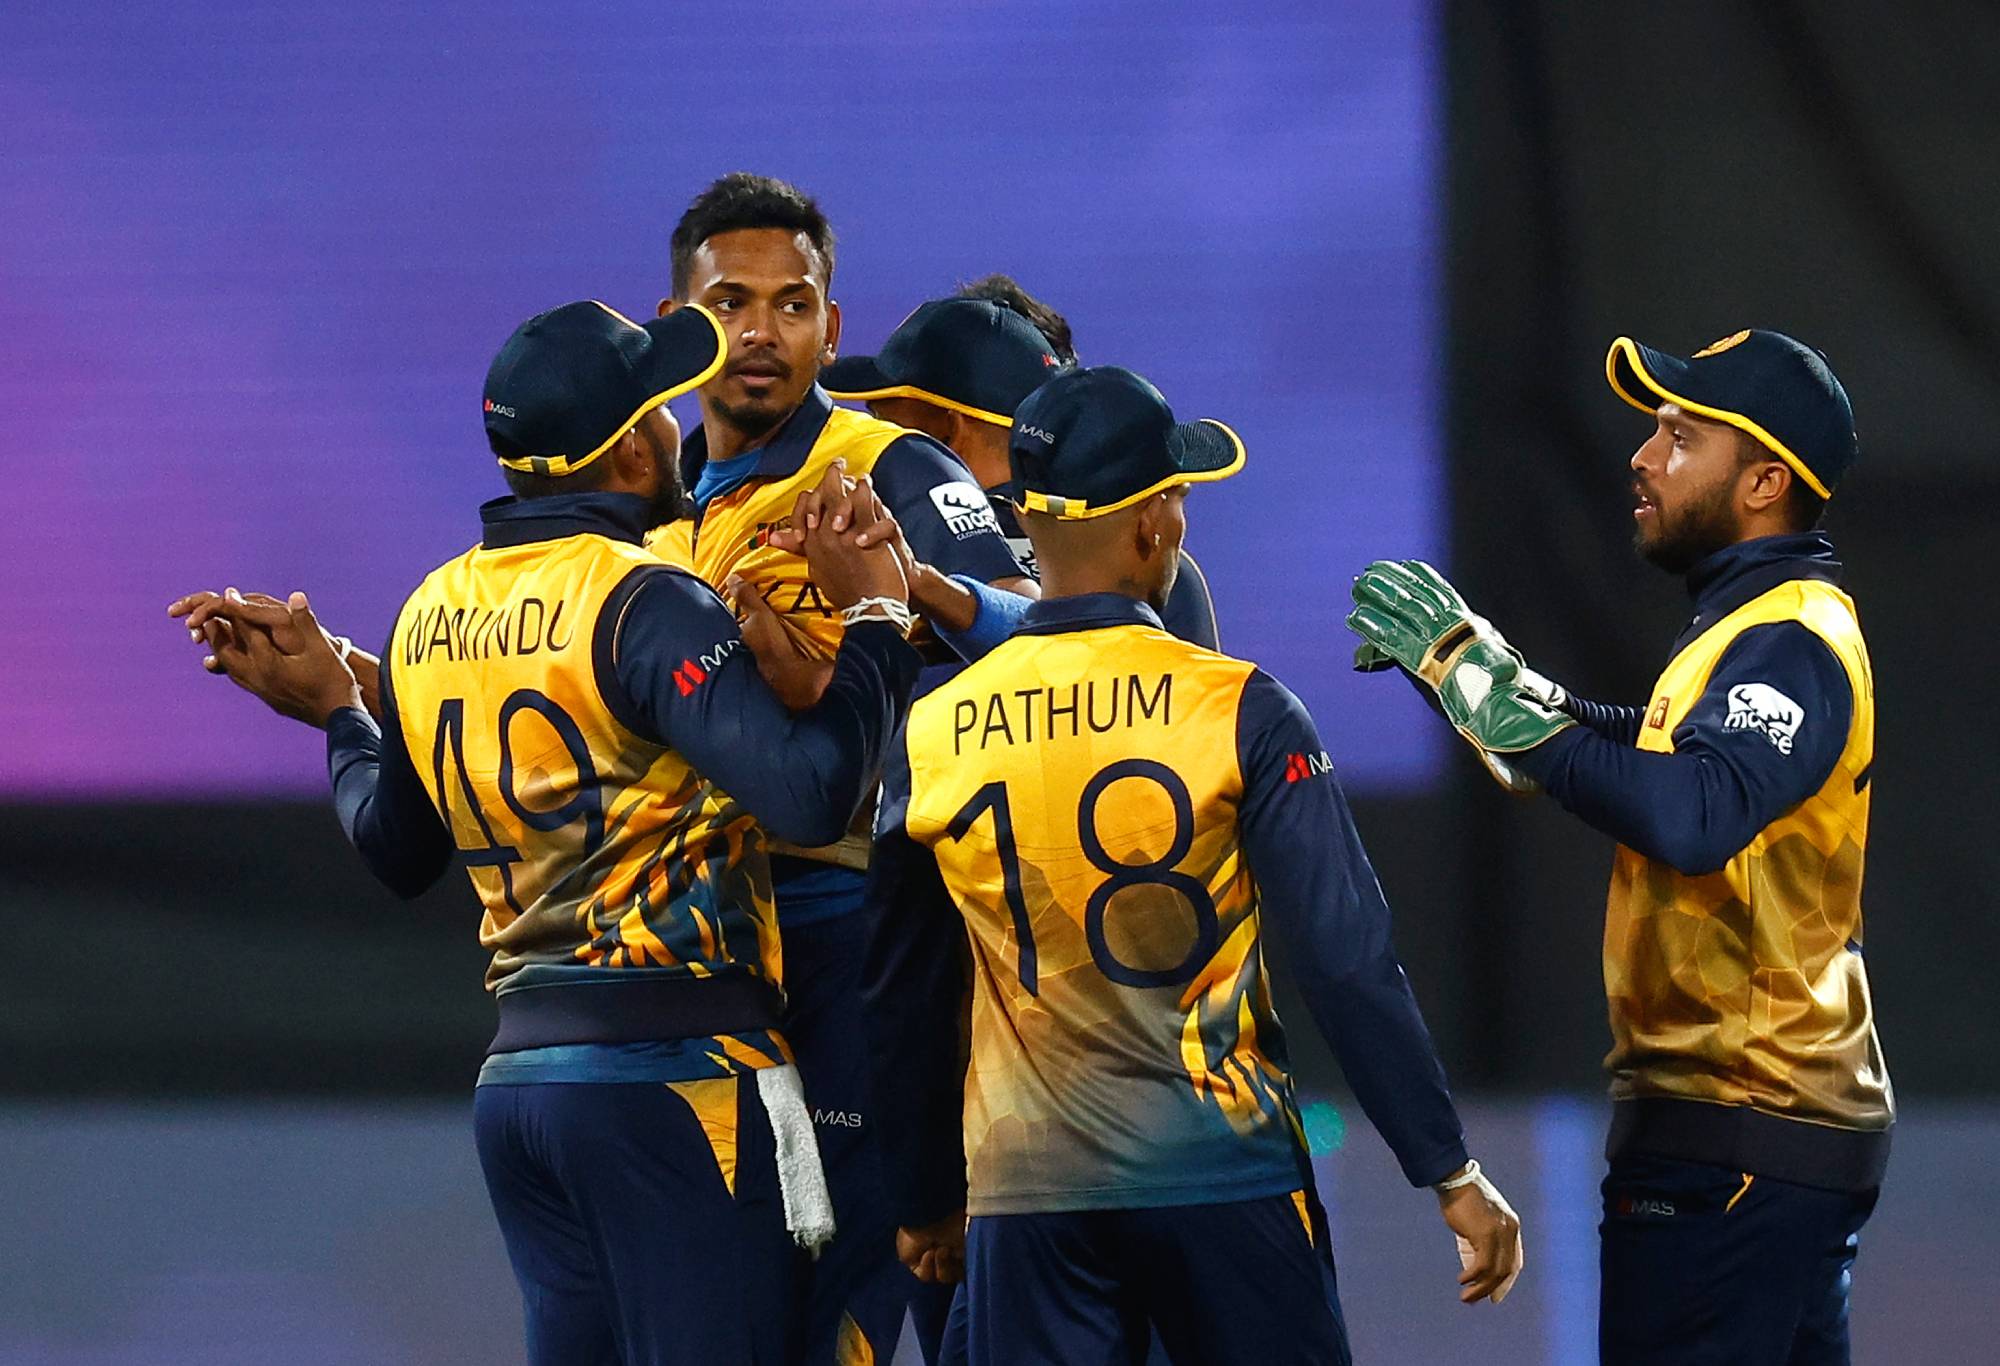 Dushmantha Chameera of Sri Lanka celebrates with team mates after taking the wicket of Muhammad Waseem of the United Arab Emirates for 2 runs during the ICC Men's T20 World Cup match between Sri Lanka and UAE at GMHBA Stadium on October 18, 2022 in Geelong, Australia. (Photo by Daniel Pockett-ICC/ICC via Getty Images)